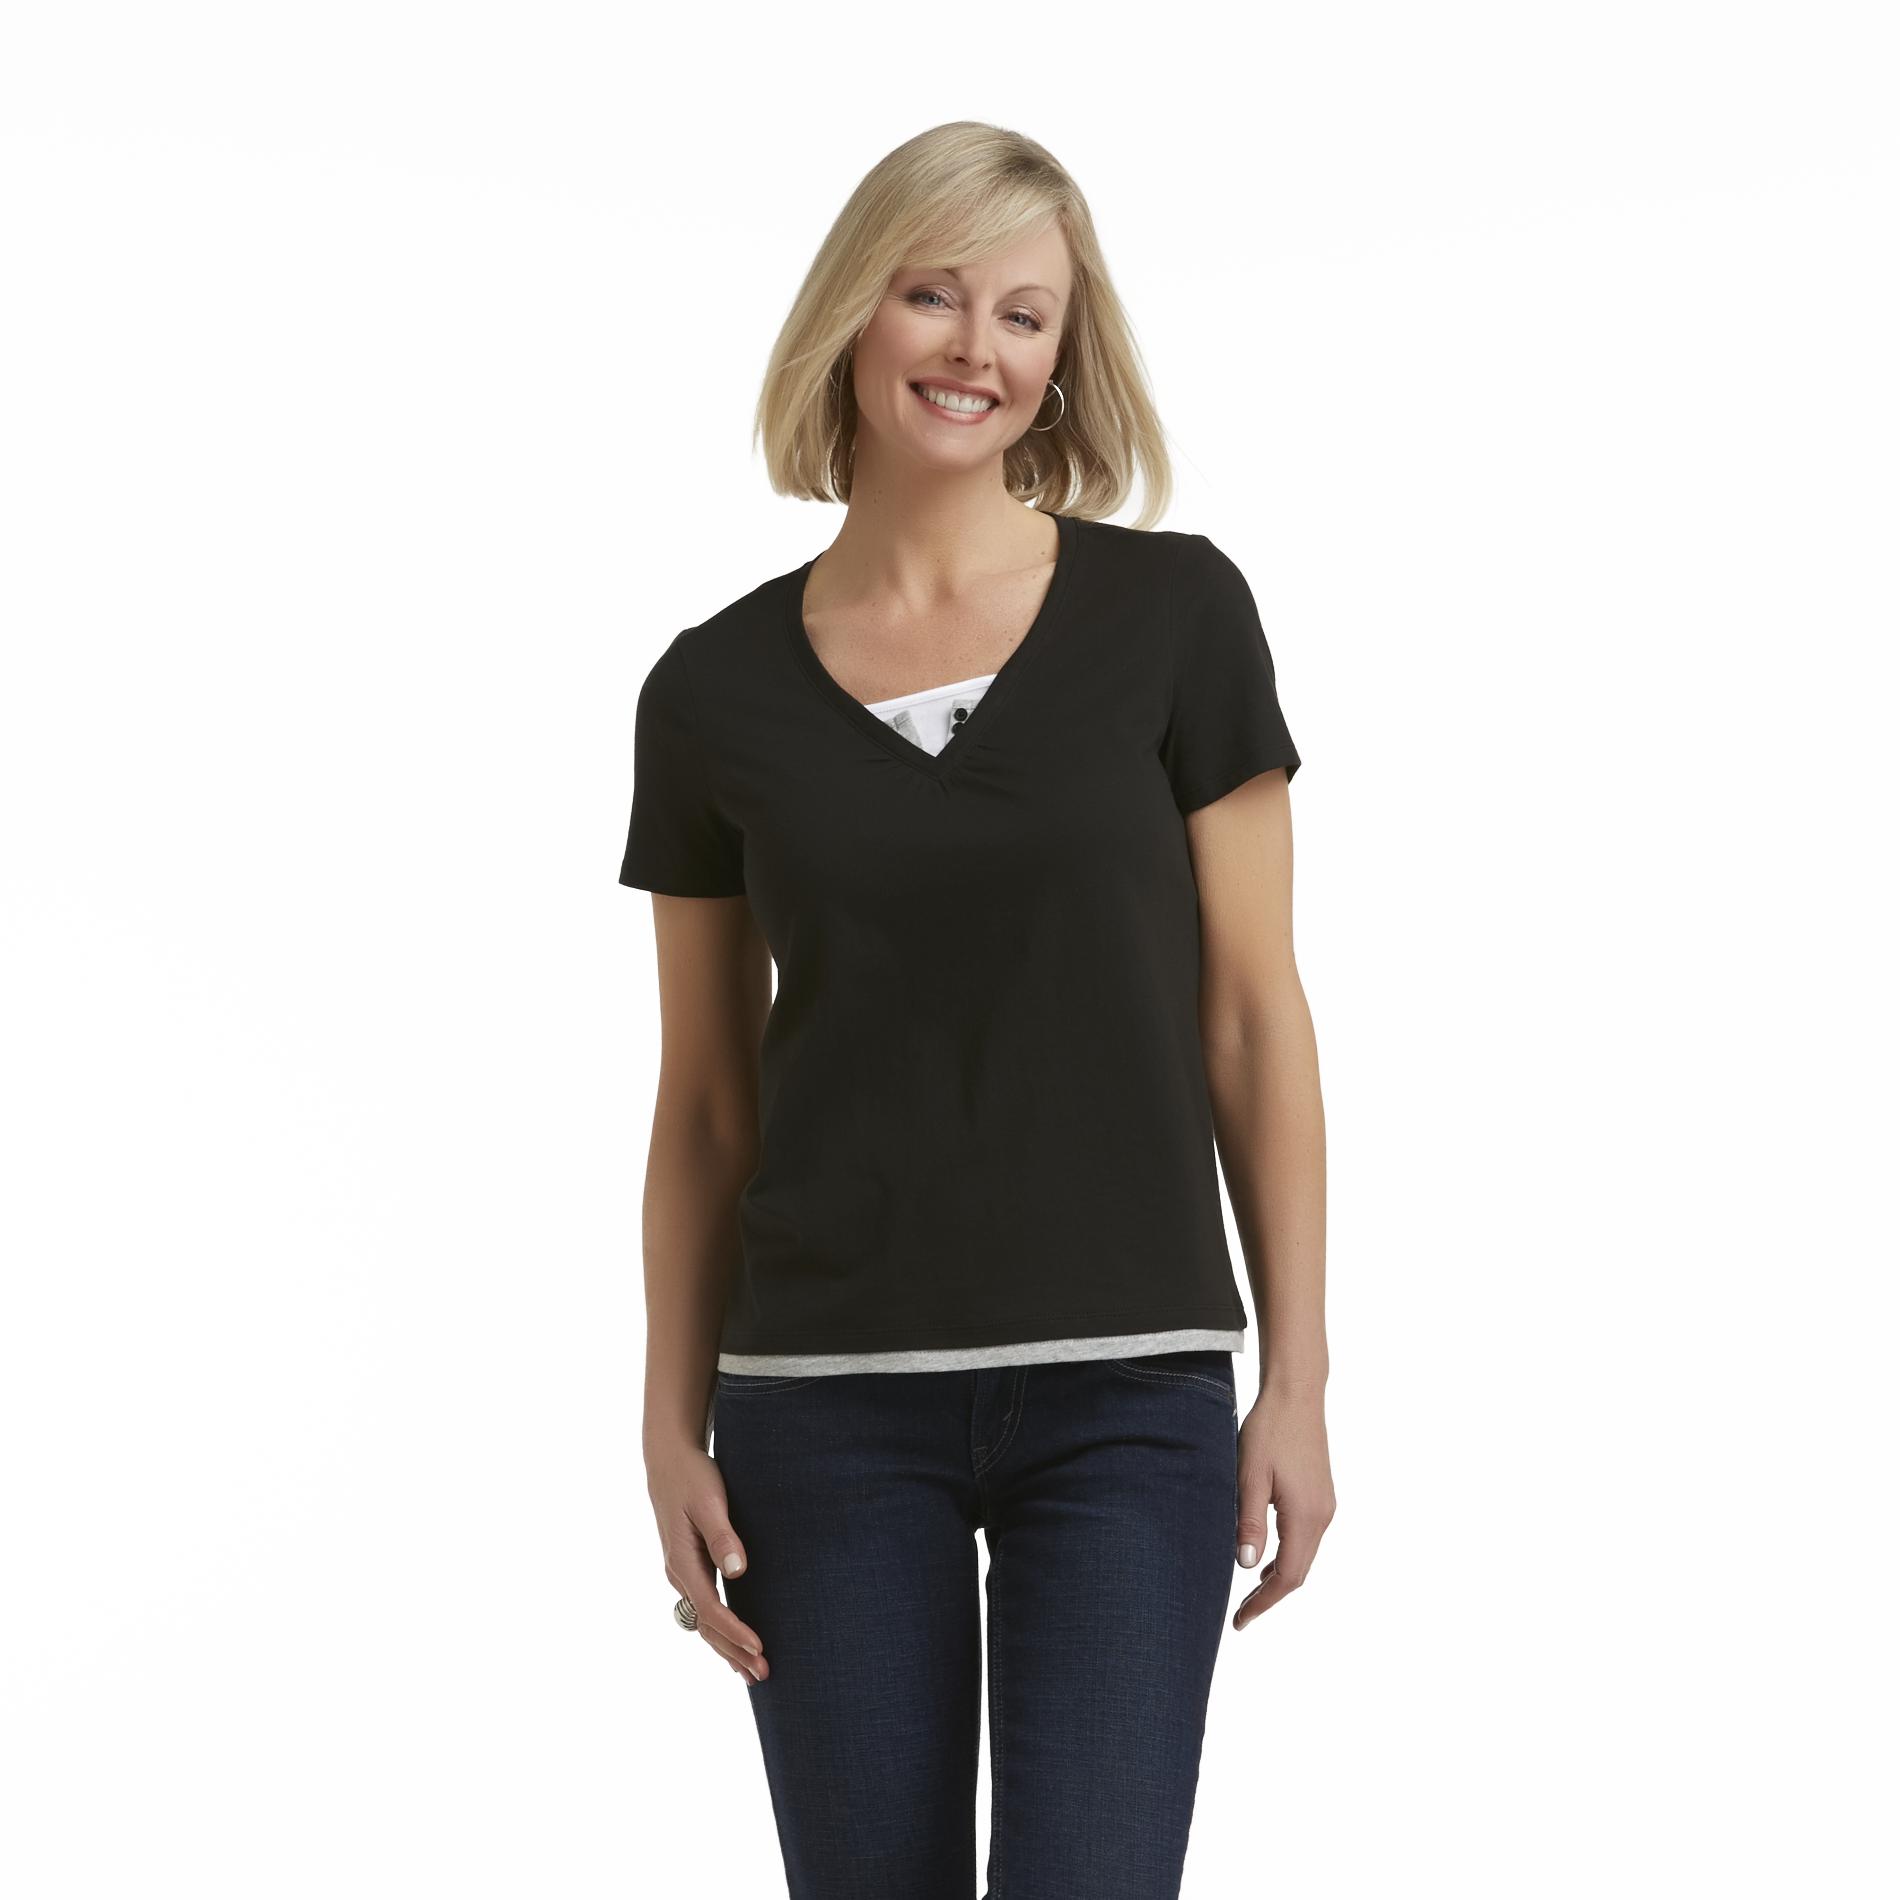 Basic Editions Women's Layered-Look T-Shirt